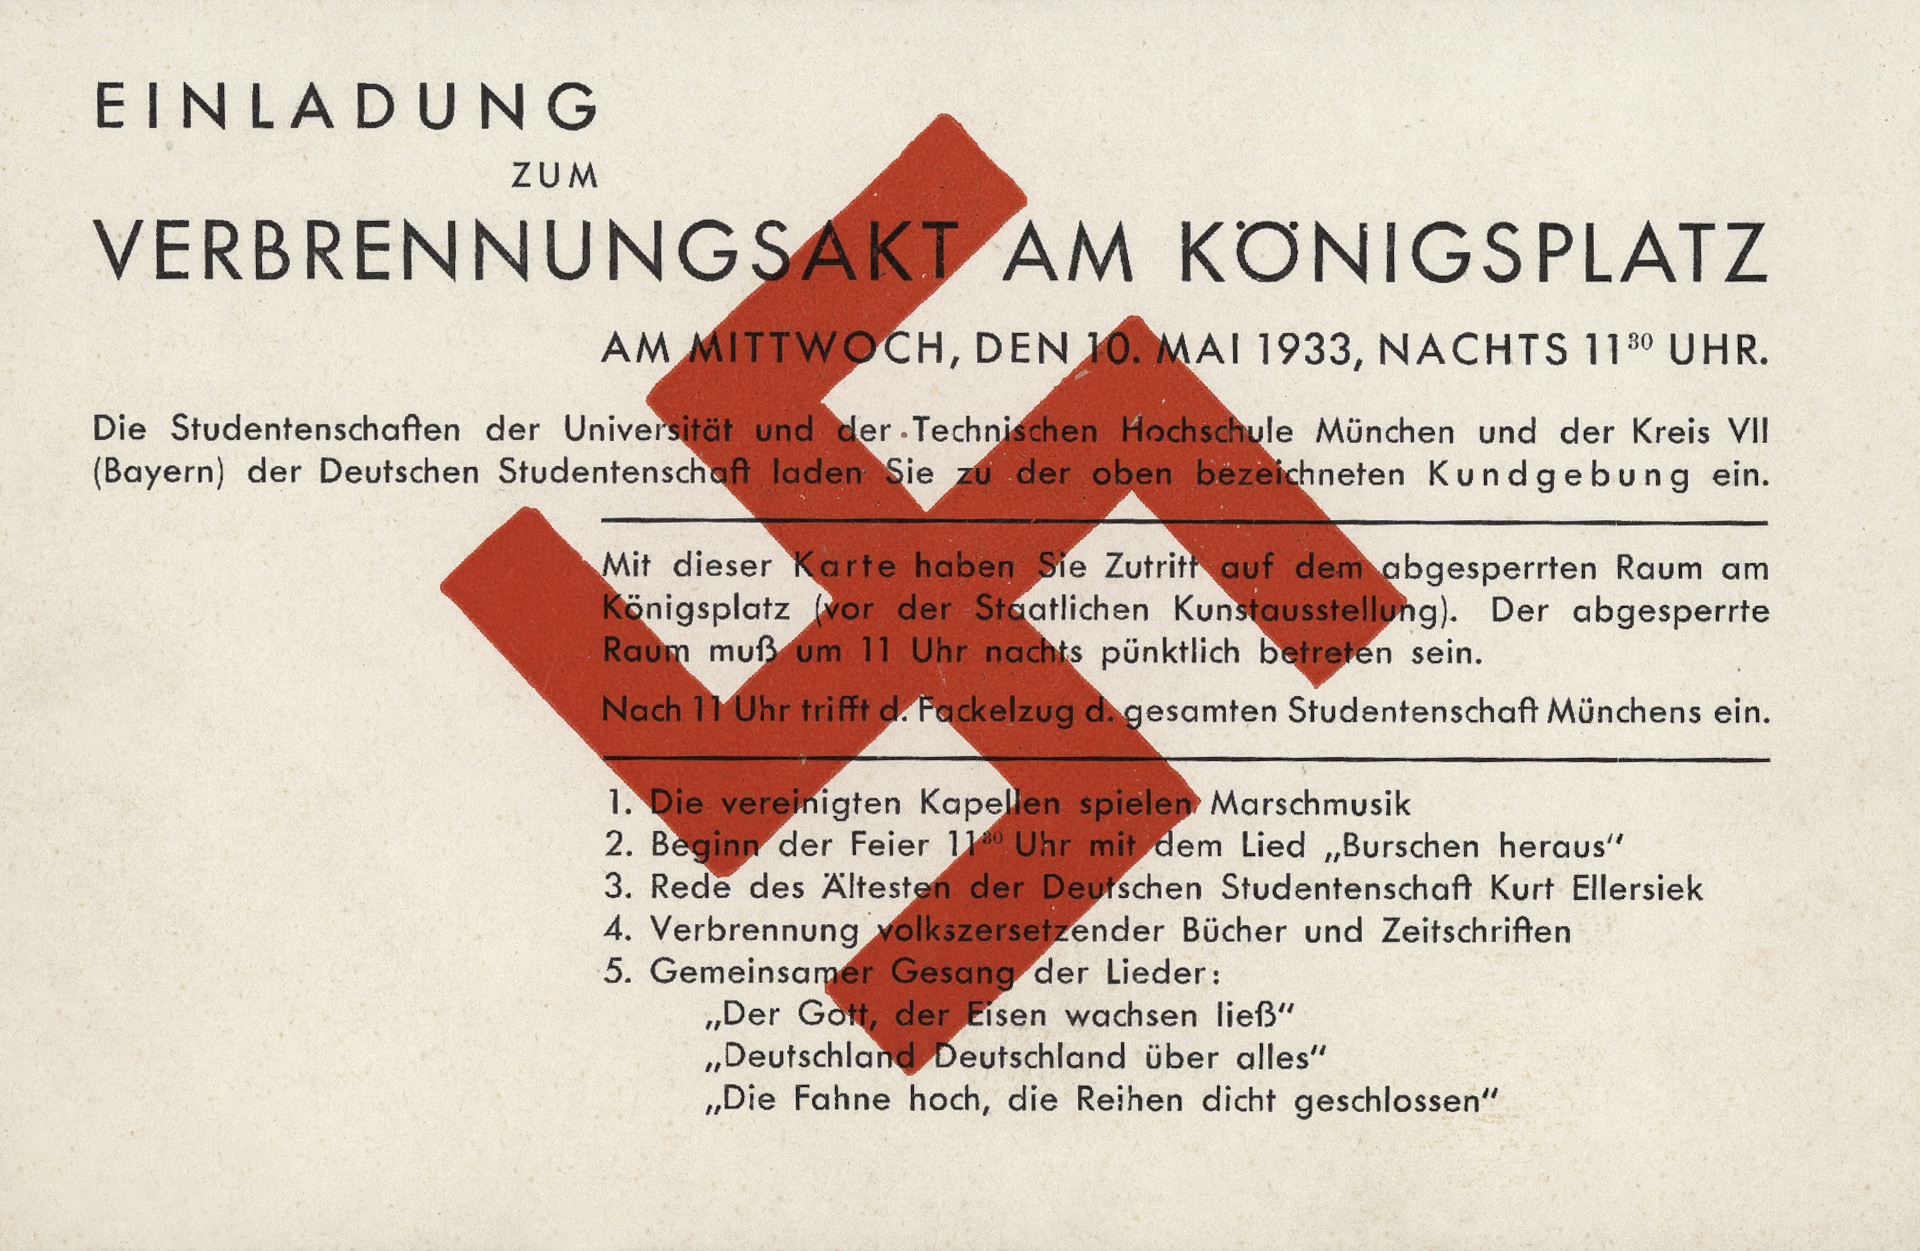 A beige invitation card with a red swastika in the middle. The text above it is titled “Invitation to a burning act on Königsplatz on Wednesday, May 10, 1933, 11.30 pm.”